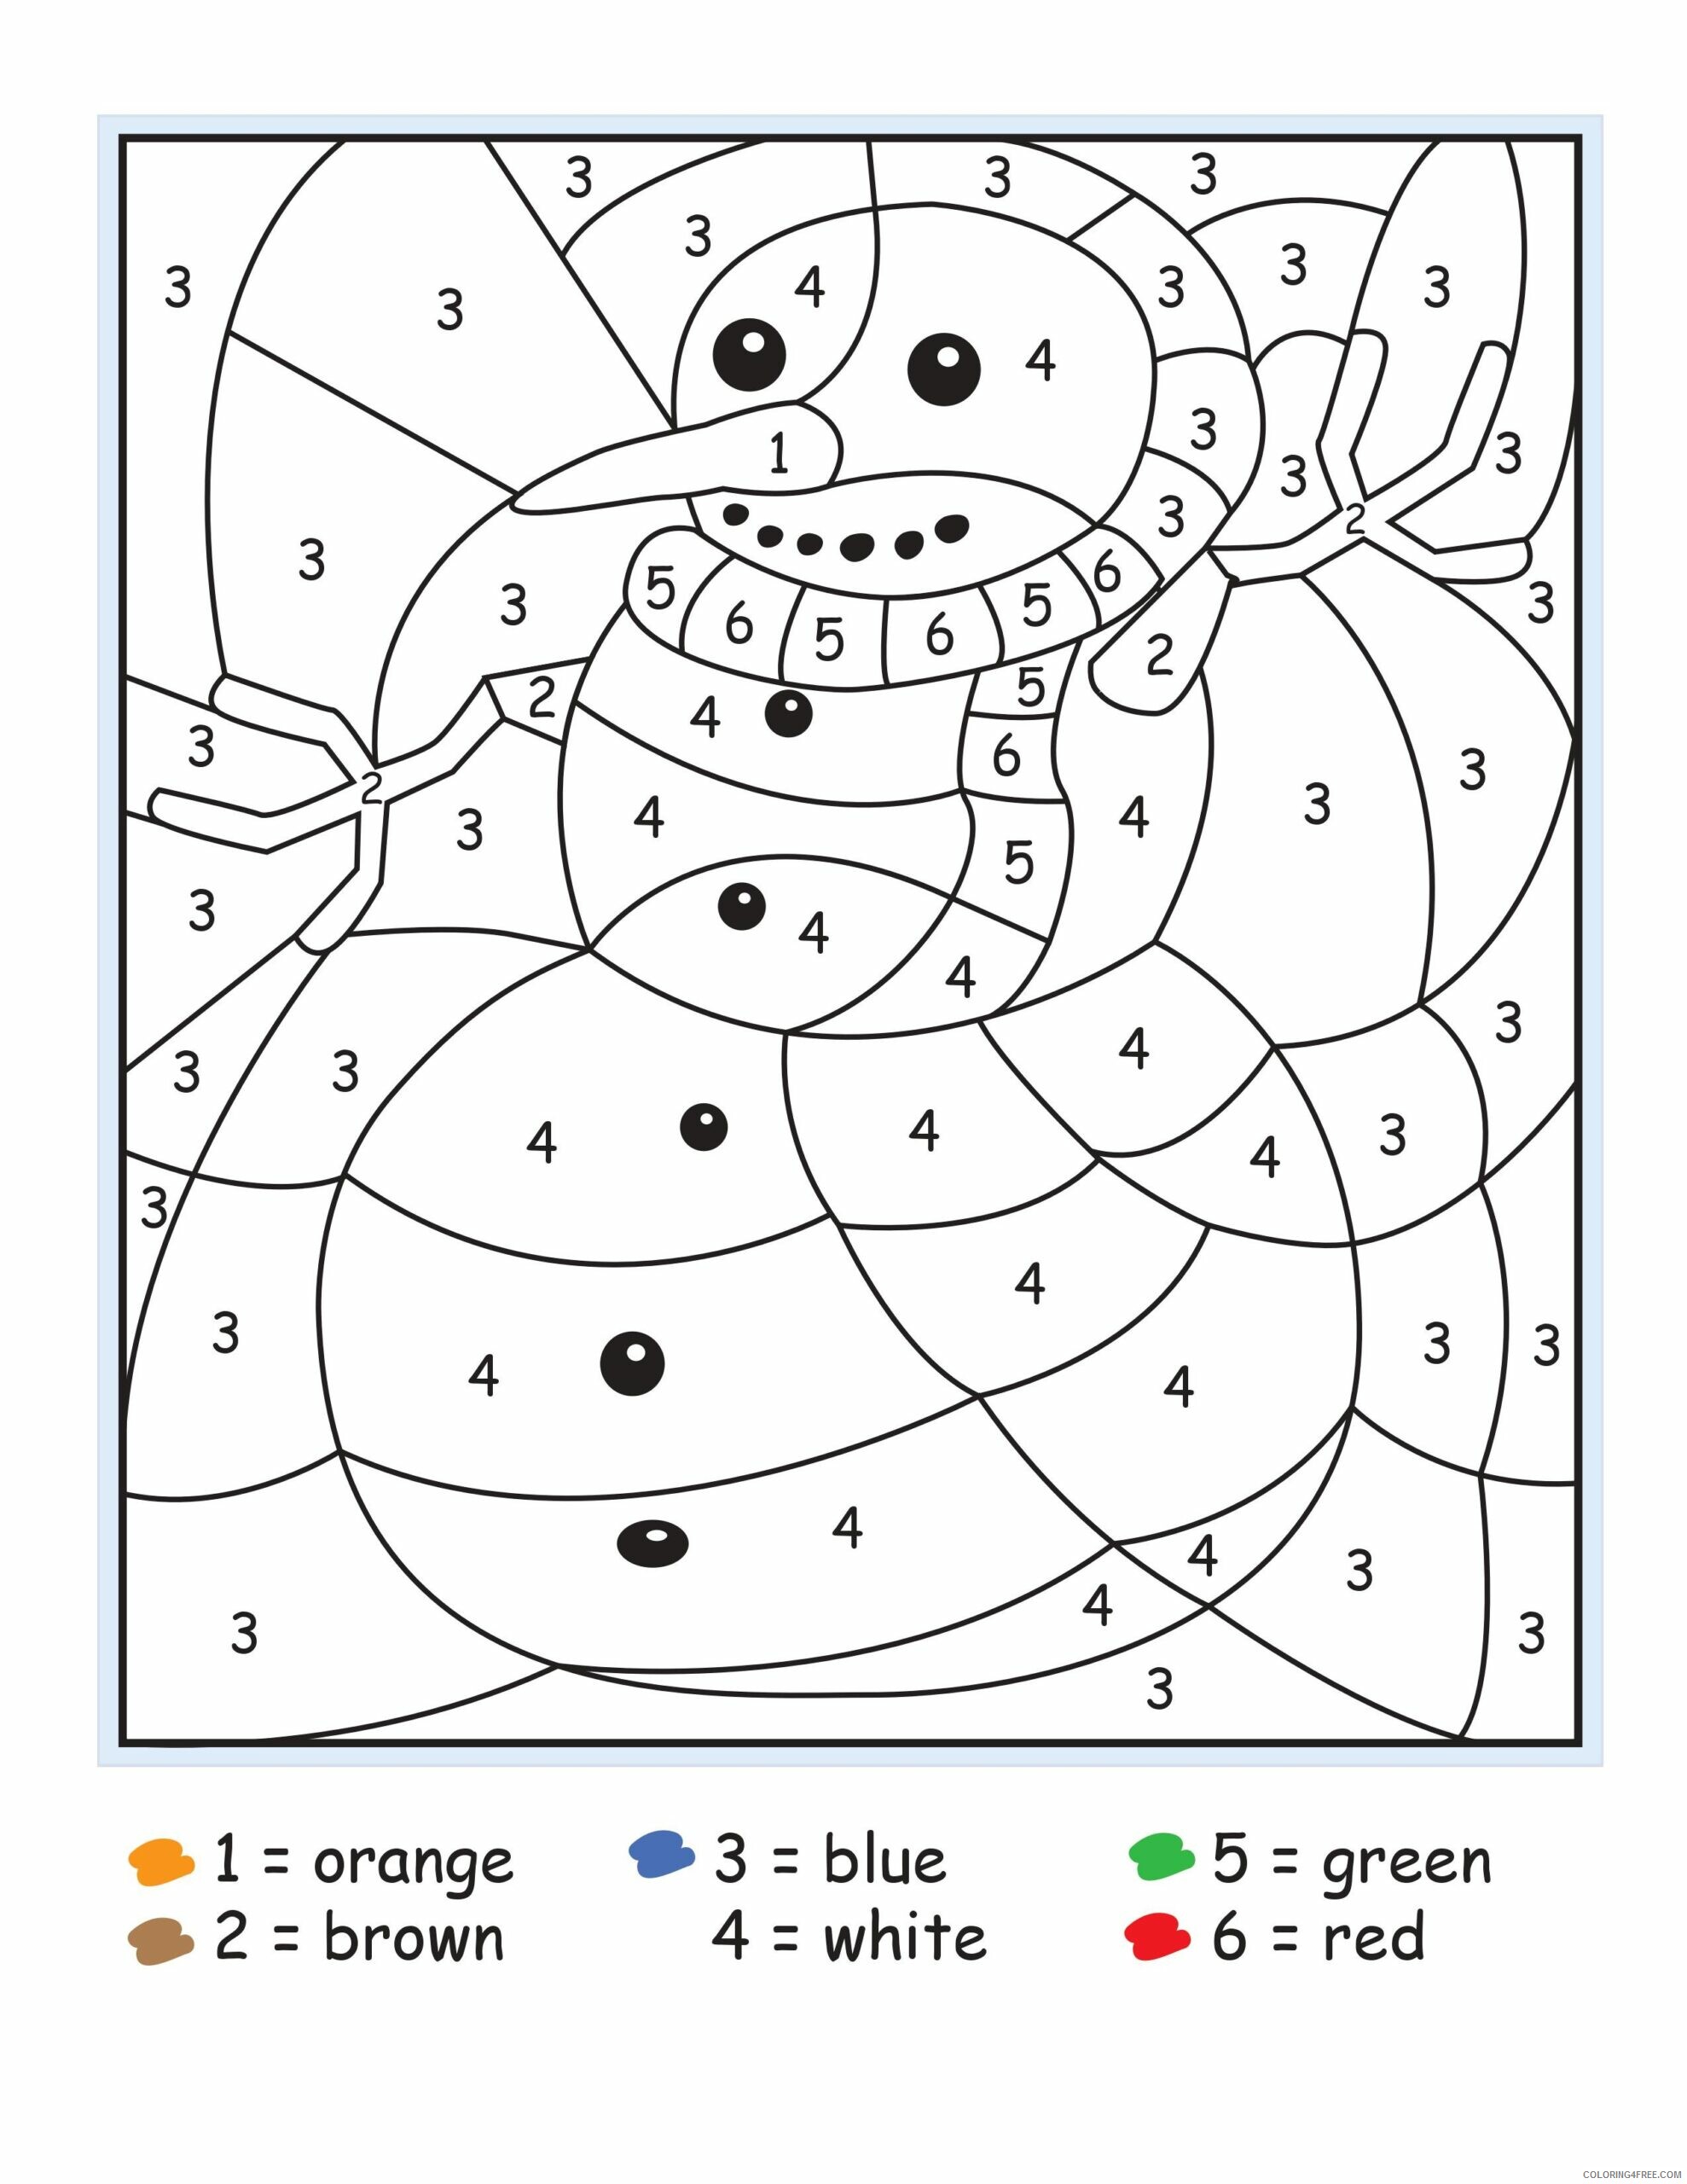 Snowman Coloring Pages Snowman by Number Kindergarten Printable 2021 5578 Coloring4free